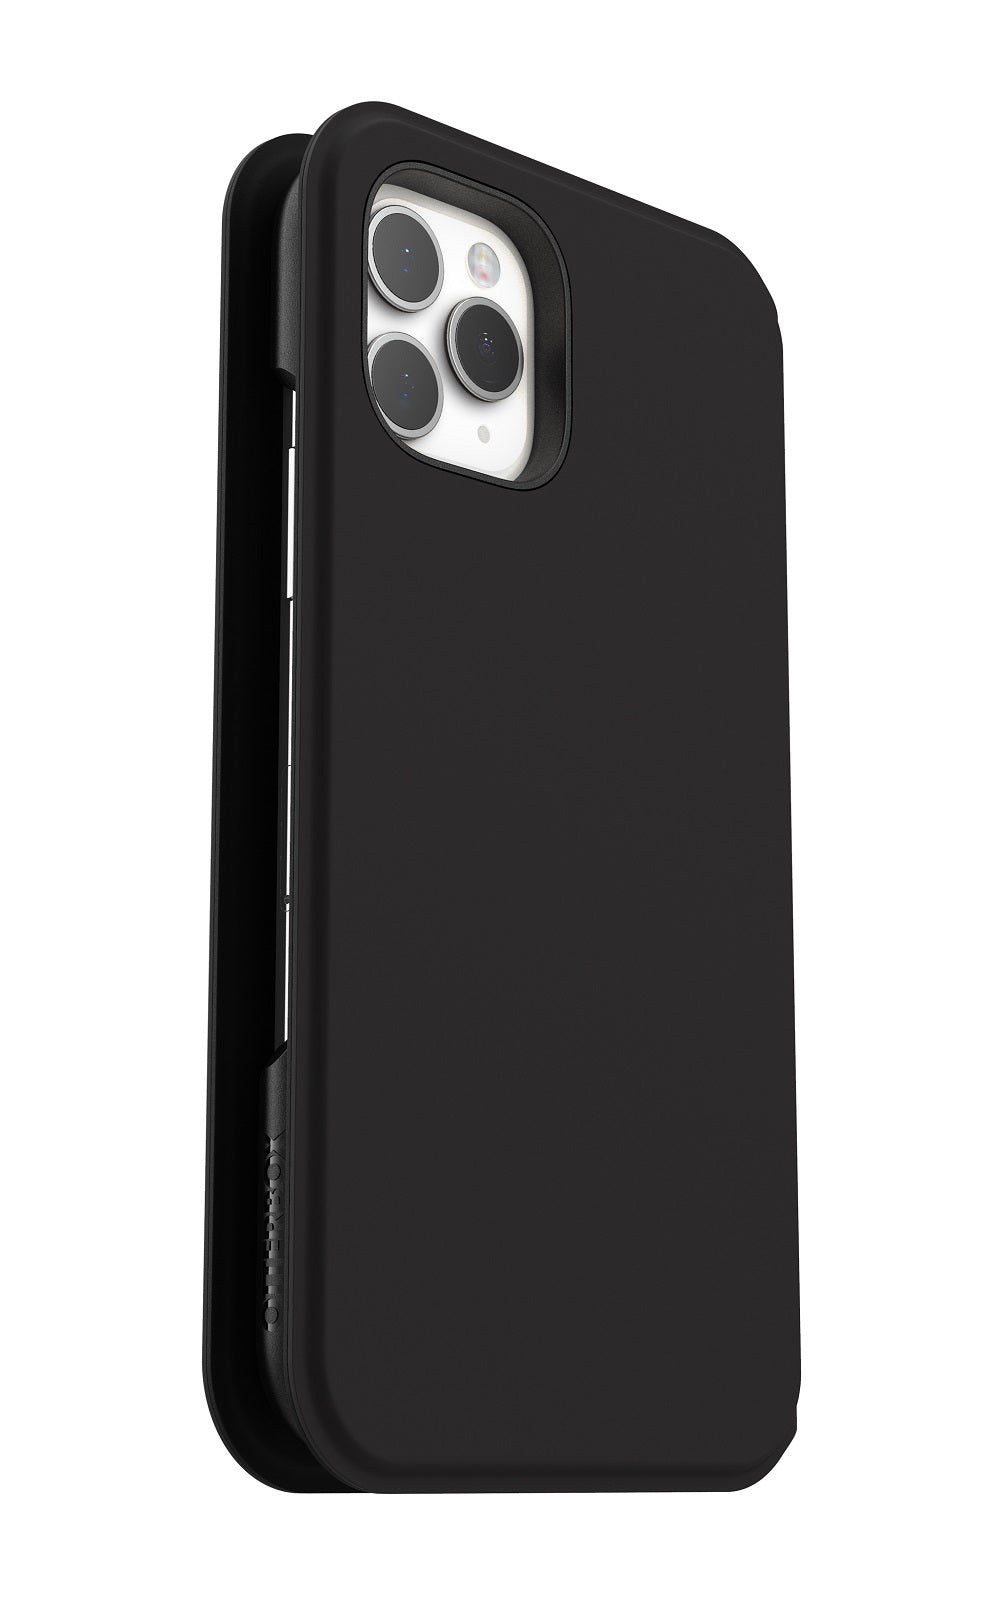 OtterBox STRADA SERIES Case for Apple iPhone 11 Pro - Black Night (Certified Refurbished)